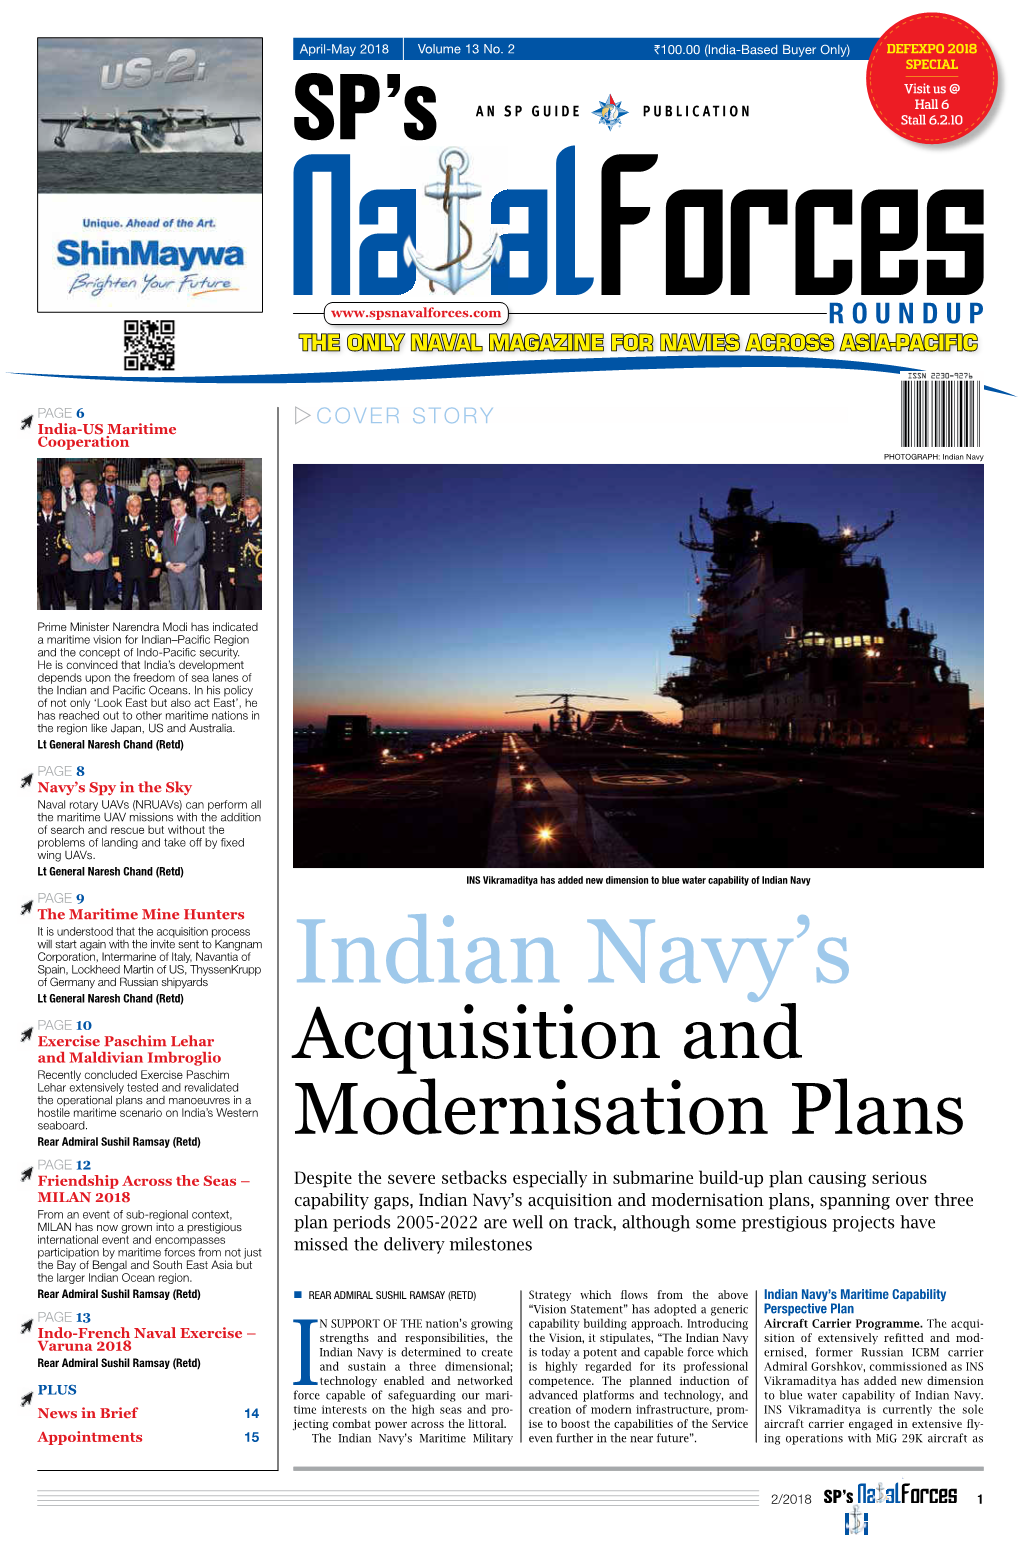 Acquisition and Modernisation Plans